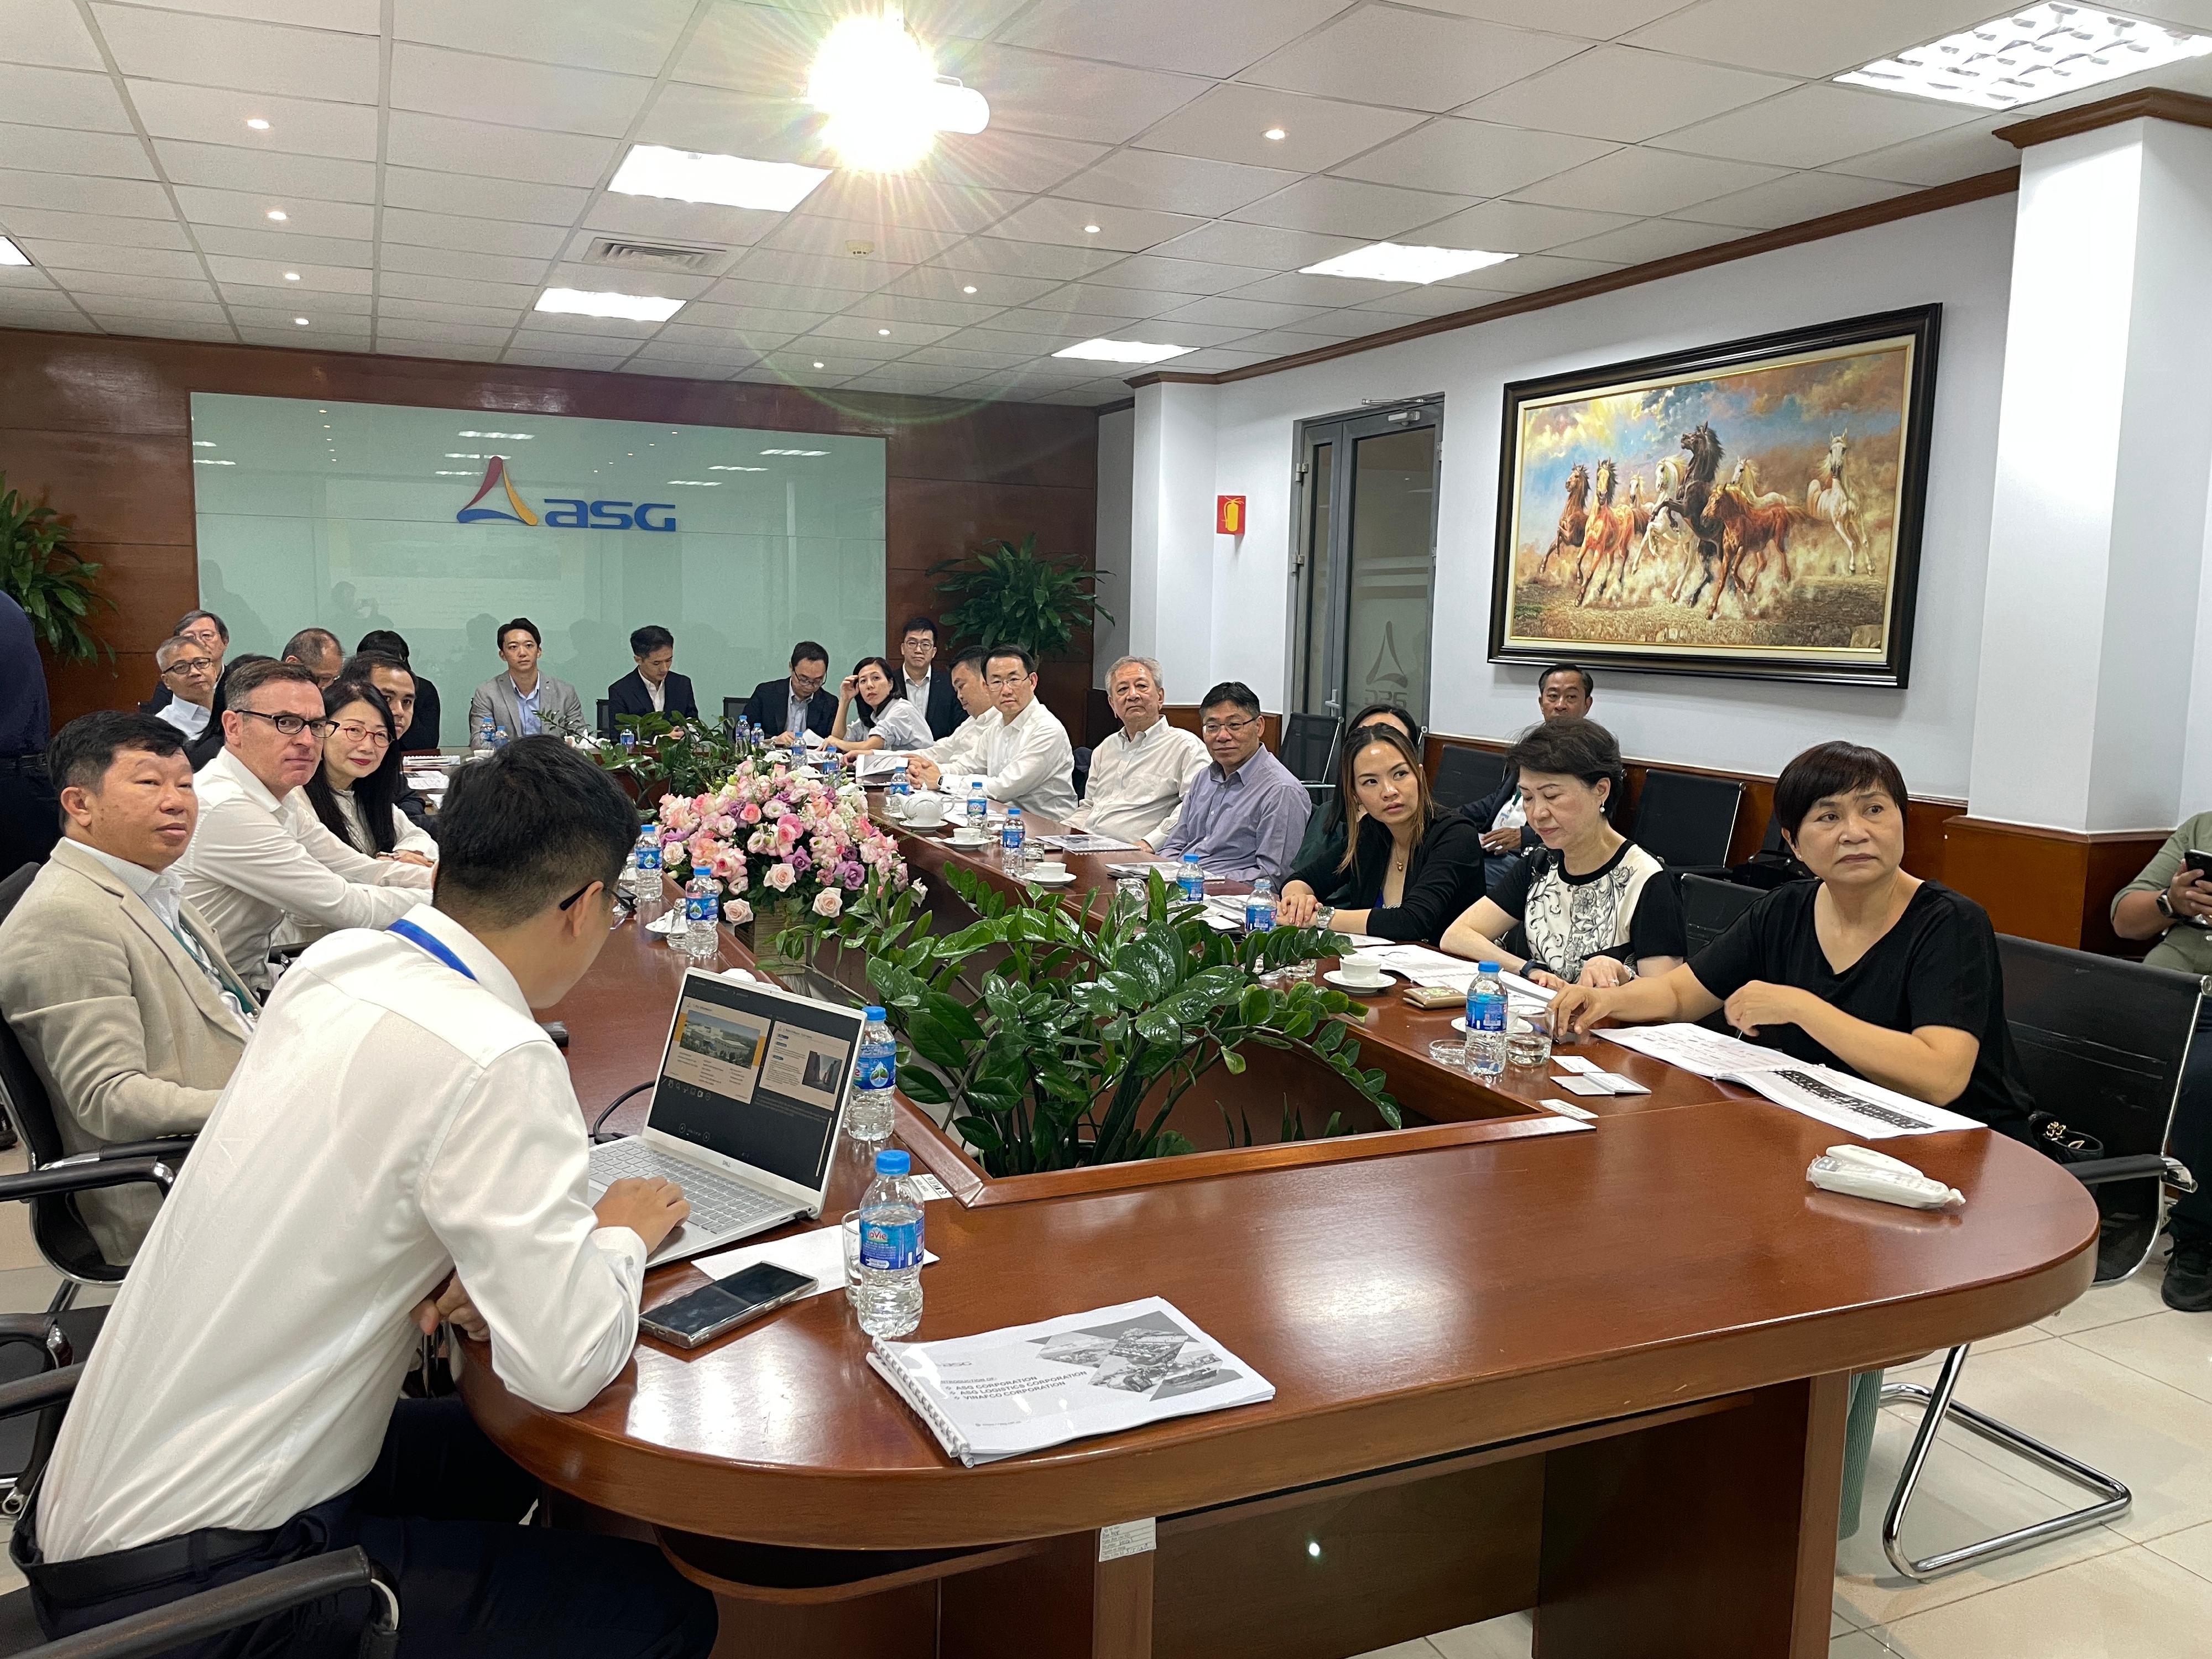 The Secretary for Transport and Logistics, Mr Lam Sai-hung (fifth right), and members of the Hong Kong Logistics Development Council visited a large-scale logistics facility in Hanoi, Vietnam, and exchanged views with representatives from the local industry yesterday afternoon (October 10).